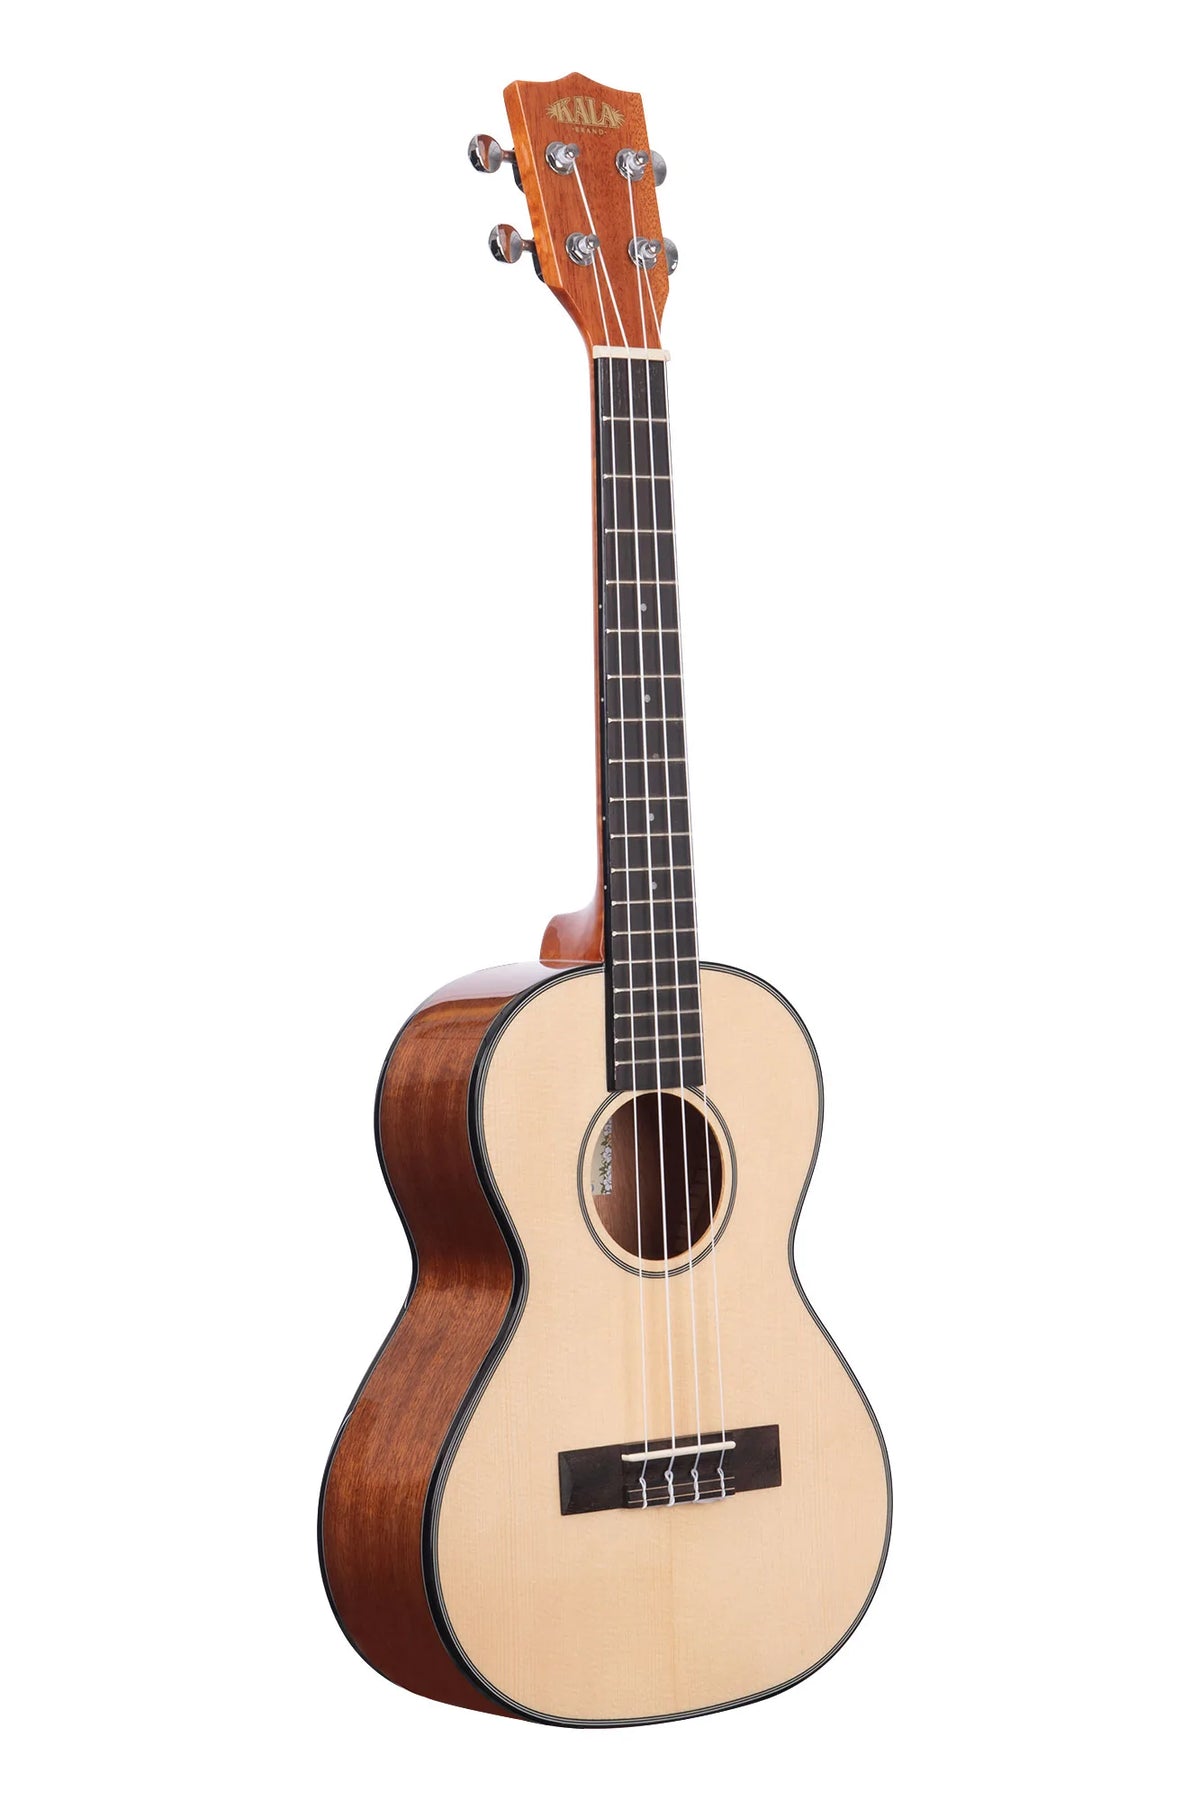 KA-STG Solid Spruce Top with Mahogany back and sides, Tenor Size